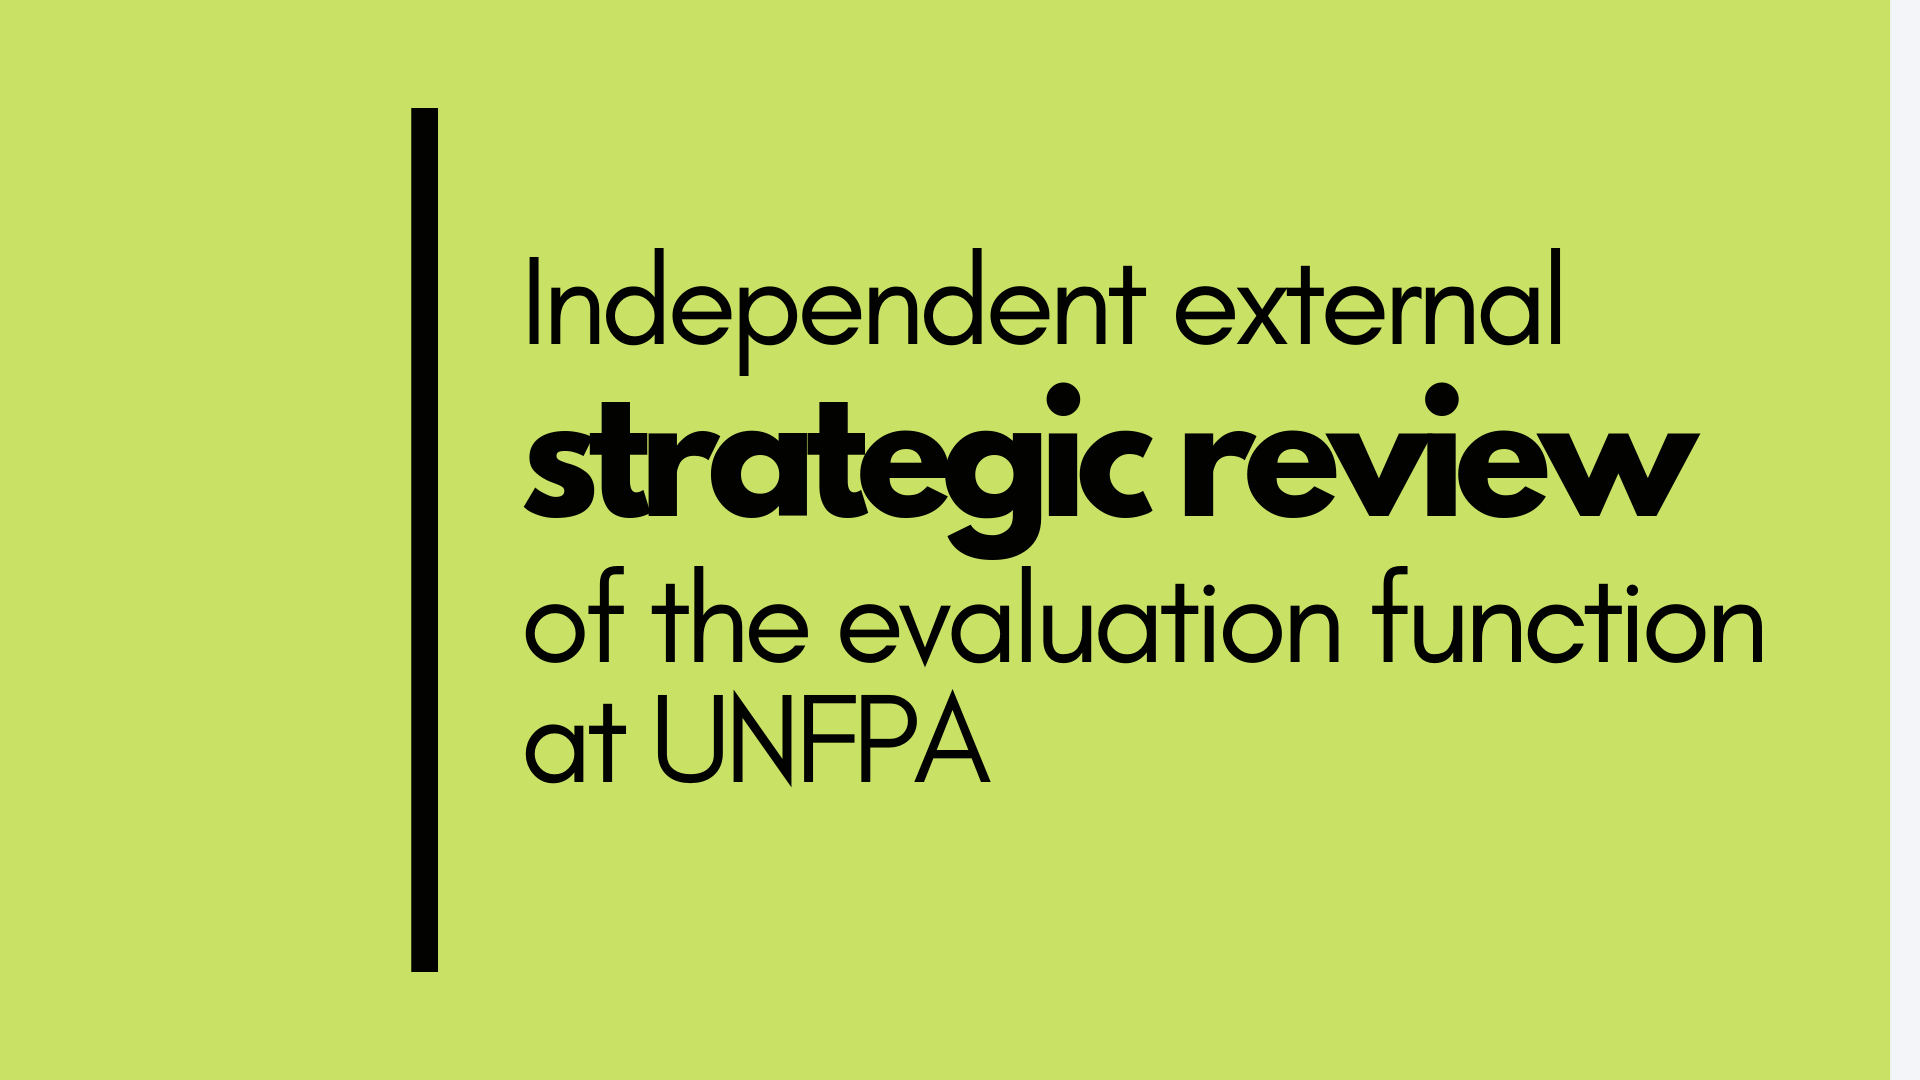 Independent external strategic review of the evaluation function of UNFPA